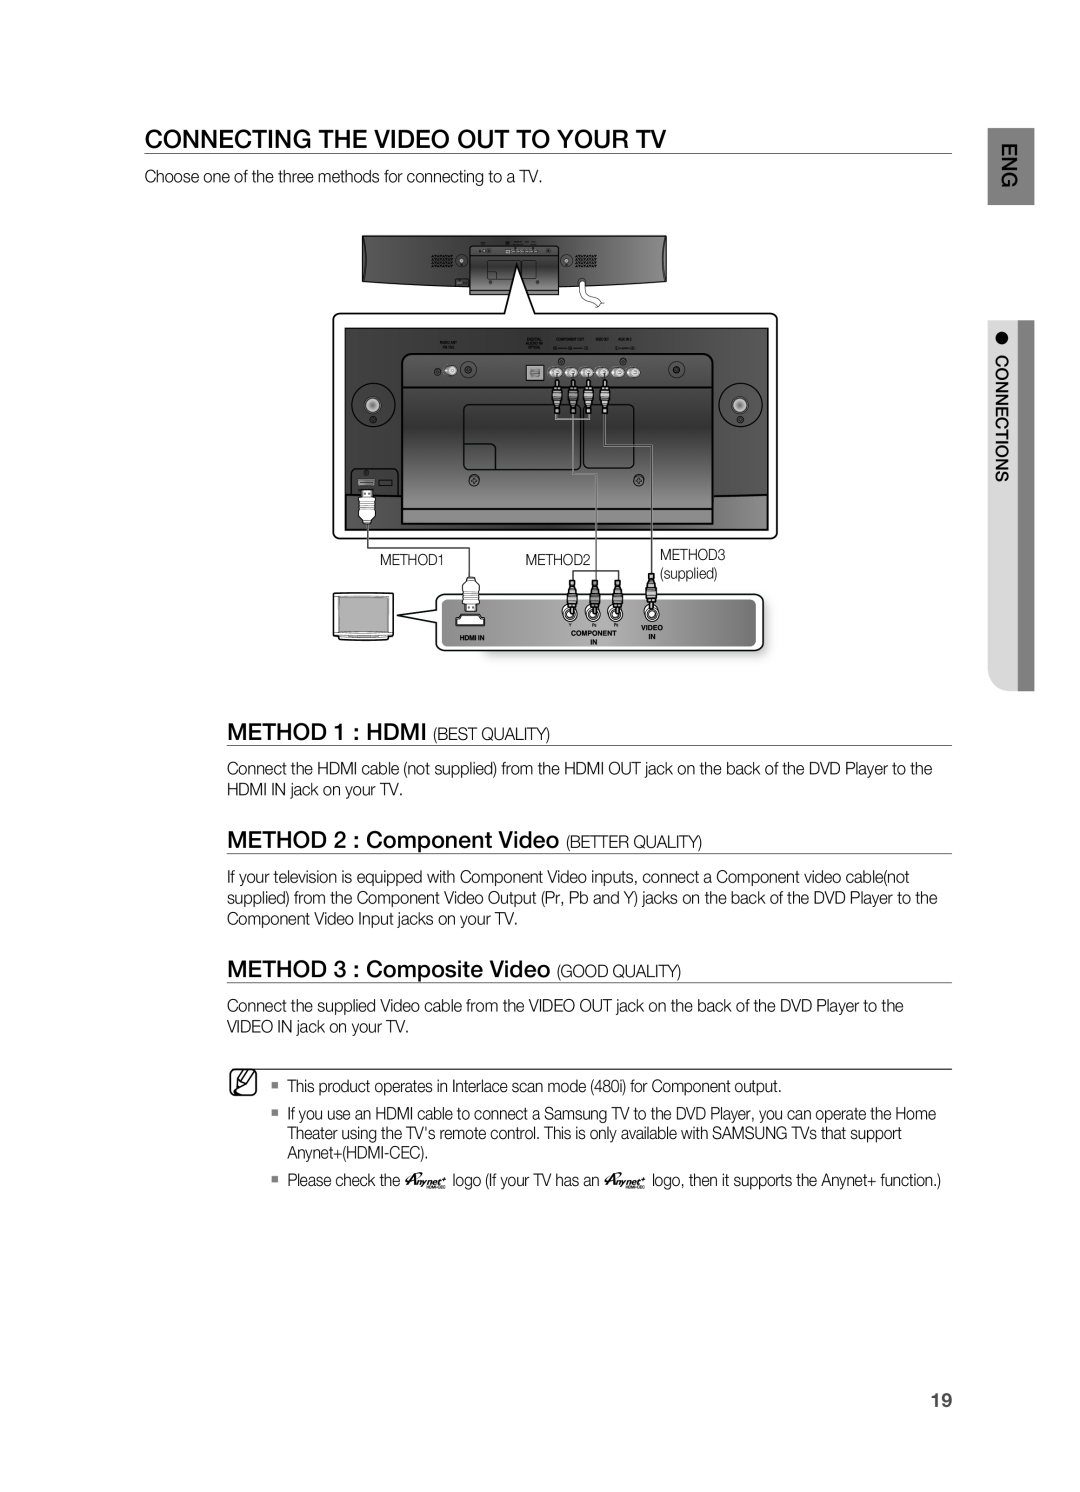 Samsung HT-X810 CONNECTING THE VIDEO OUT TO YOUr TV, METHOD 1 HDMI BEST QUALITY, METHOD 2 Component Video BETTER QUALITY 